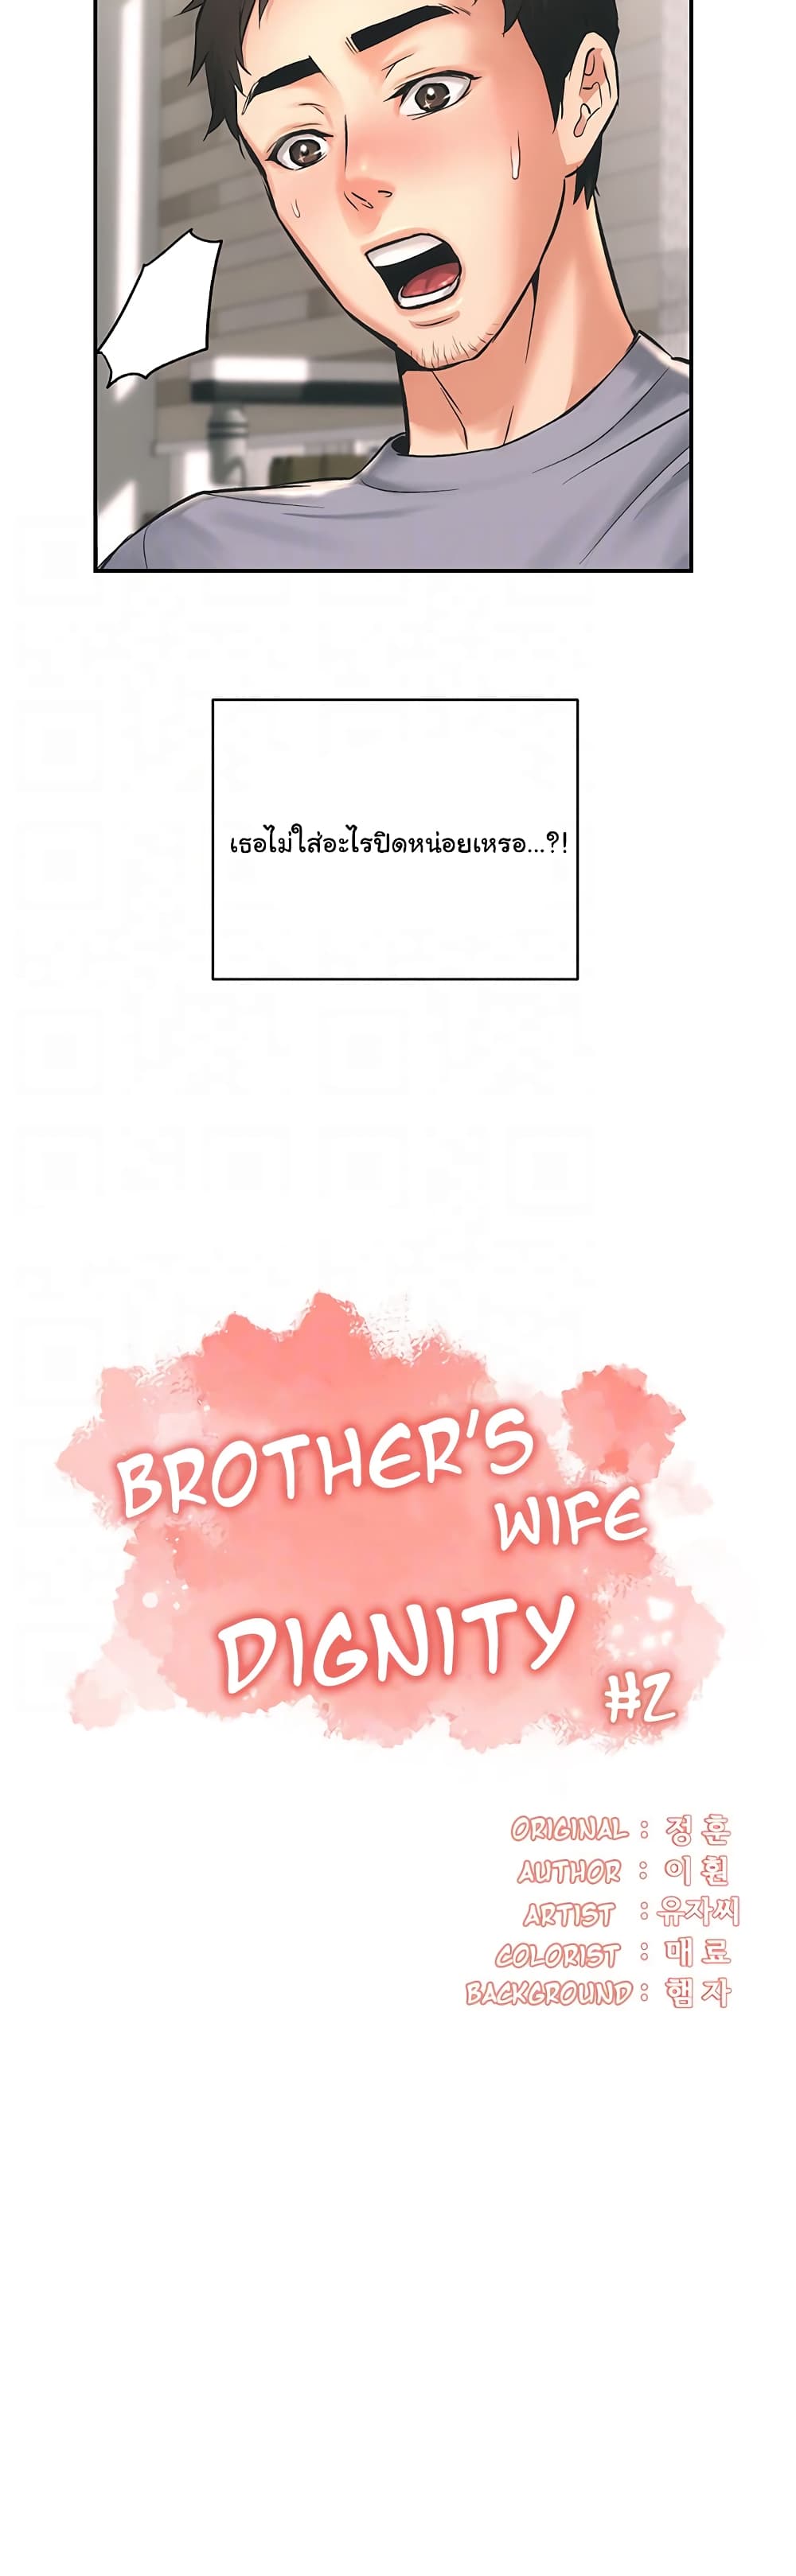 Brother's Wife Dignity 2 (4)